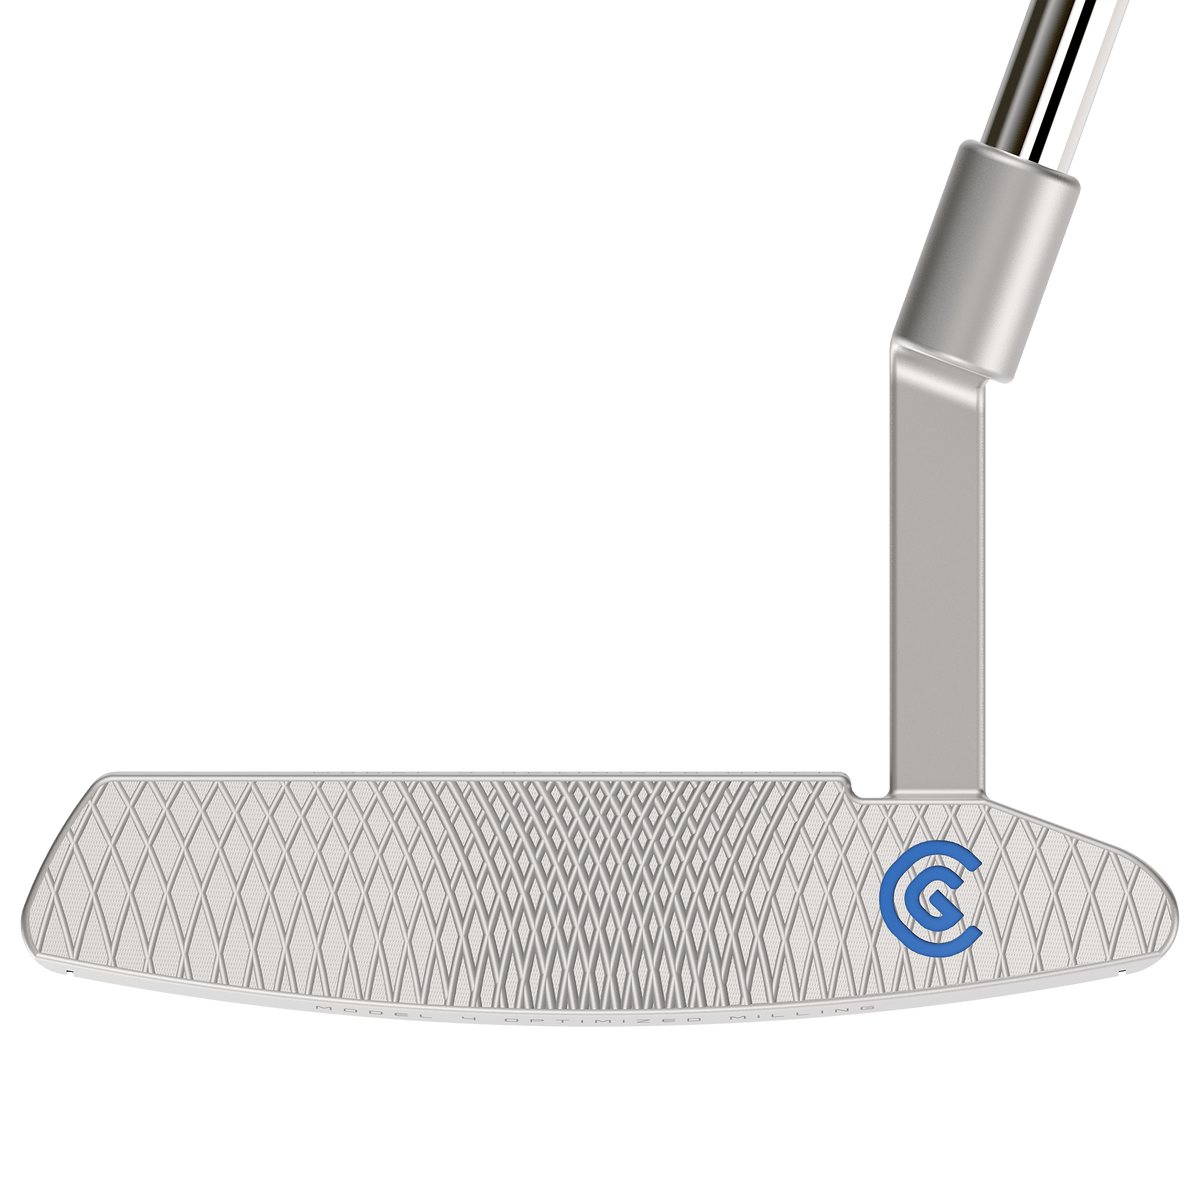 Cleveland Huntington Beach Soft #4 Putter · Right handed · 33'' · Oversized Grip